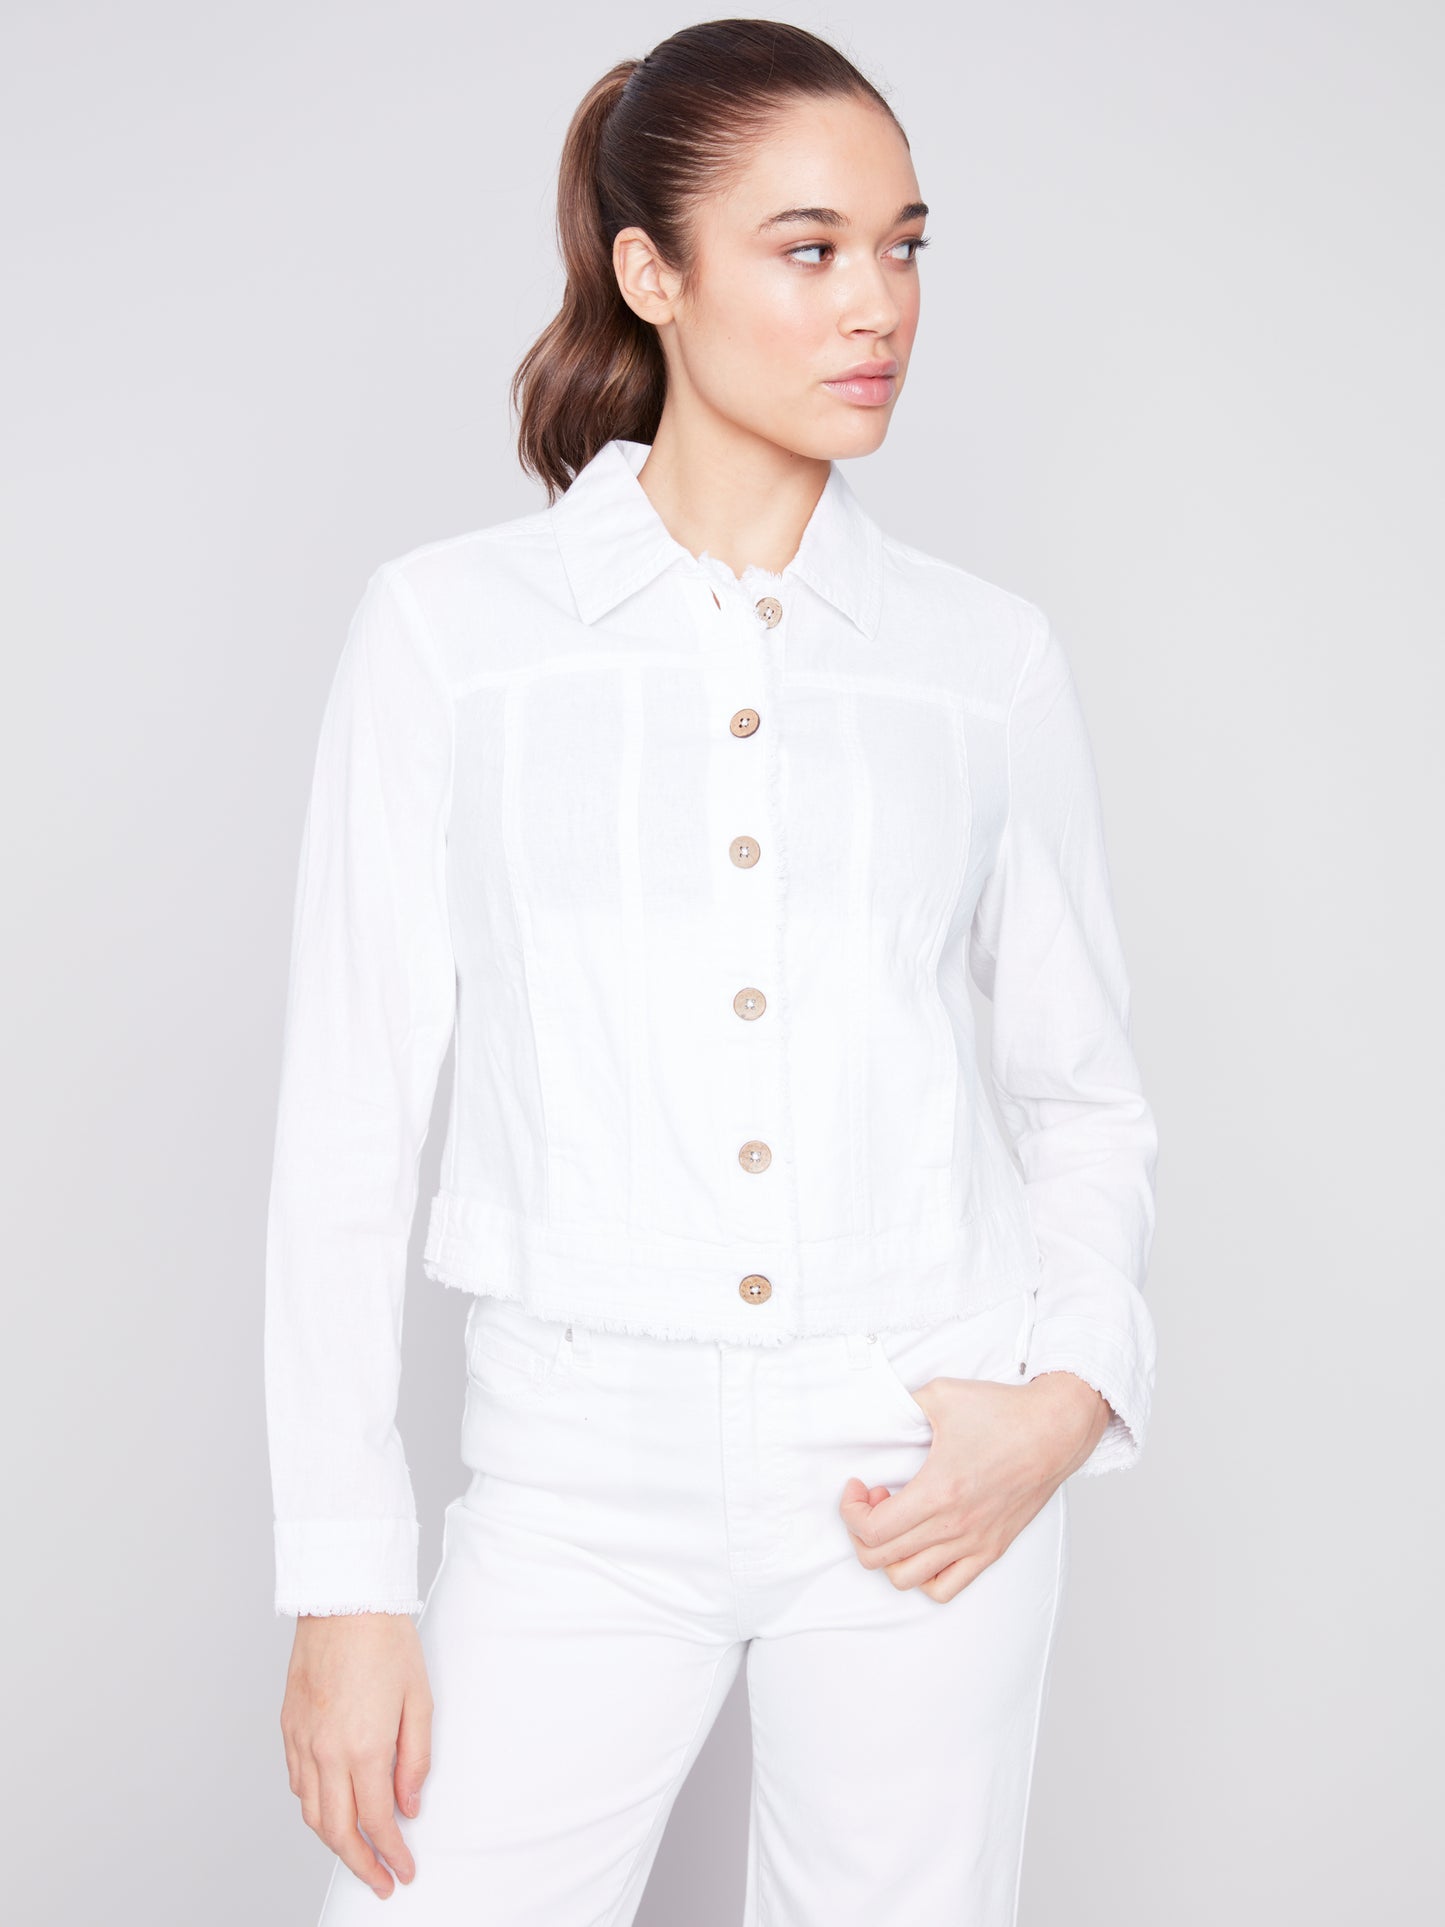 The model is wearing a Charlie B Solid White Button Up Linen Jacket.